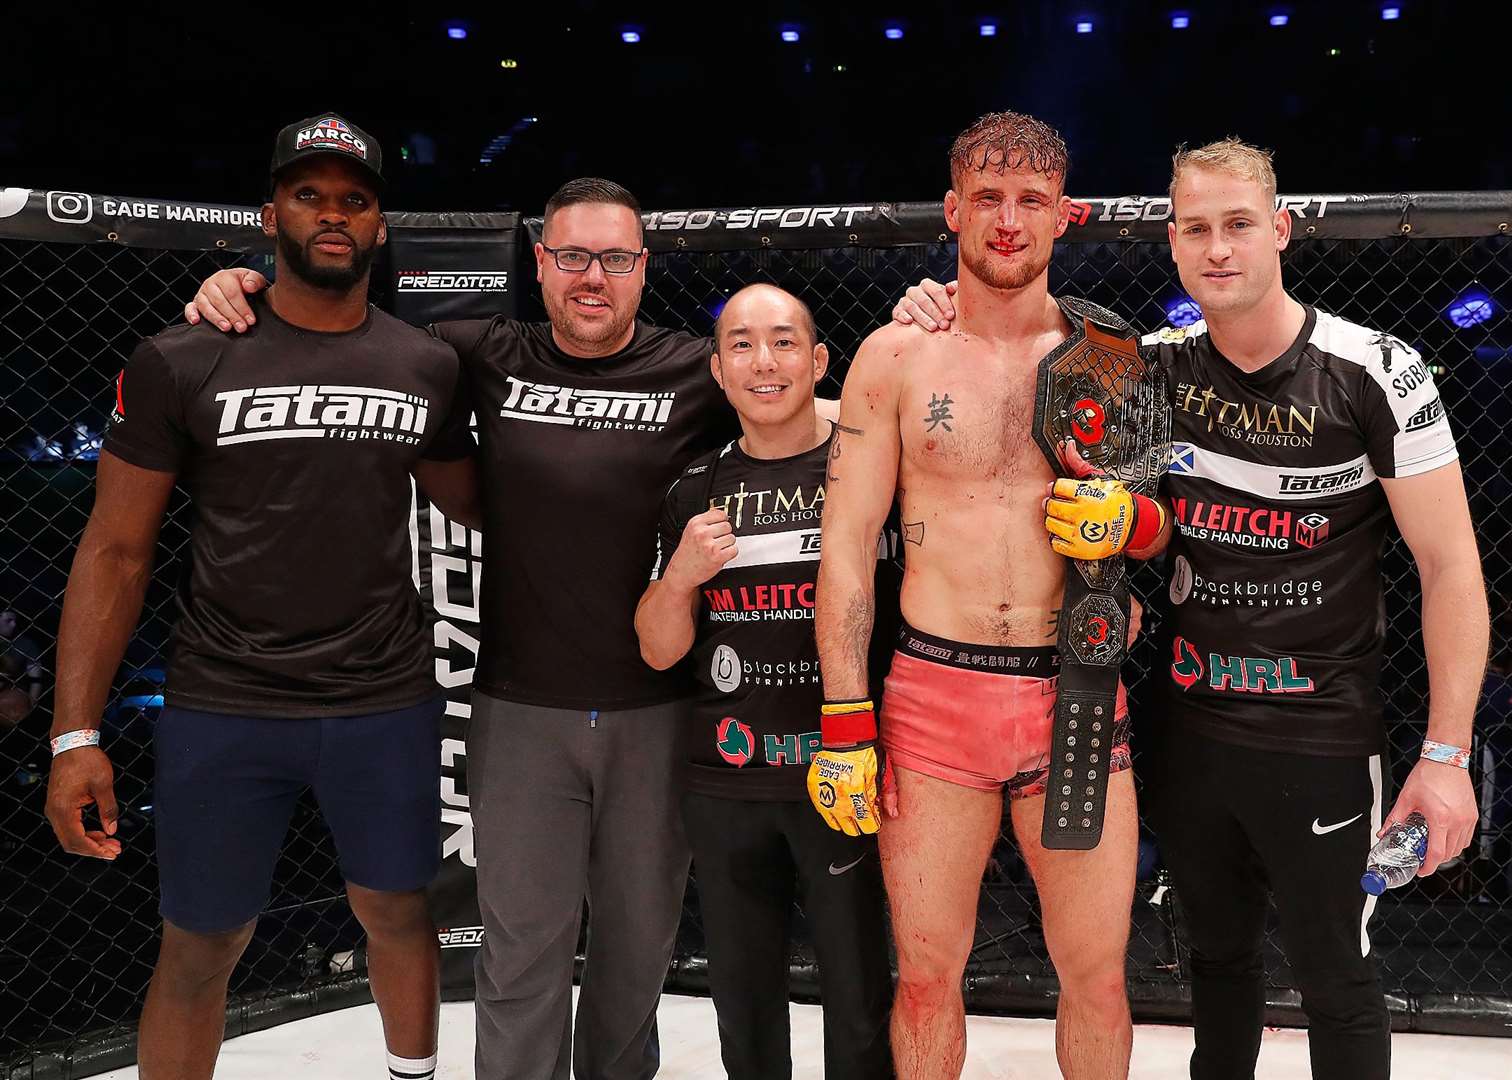 Houstons next move driven by championships after leaving Cage Warriors